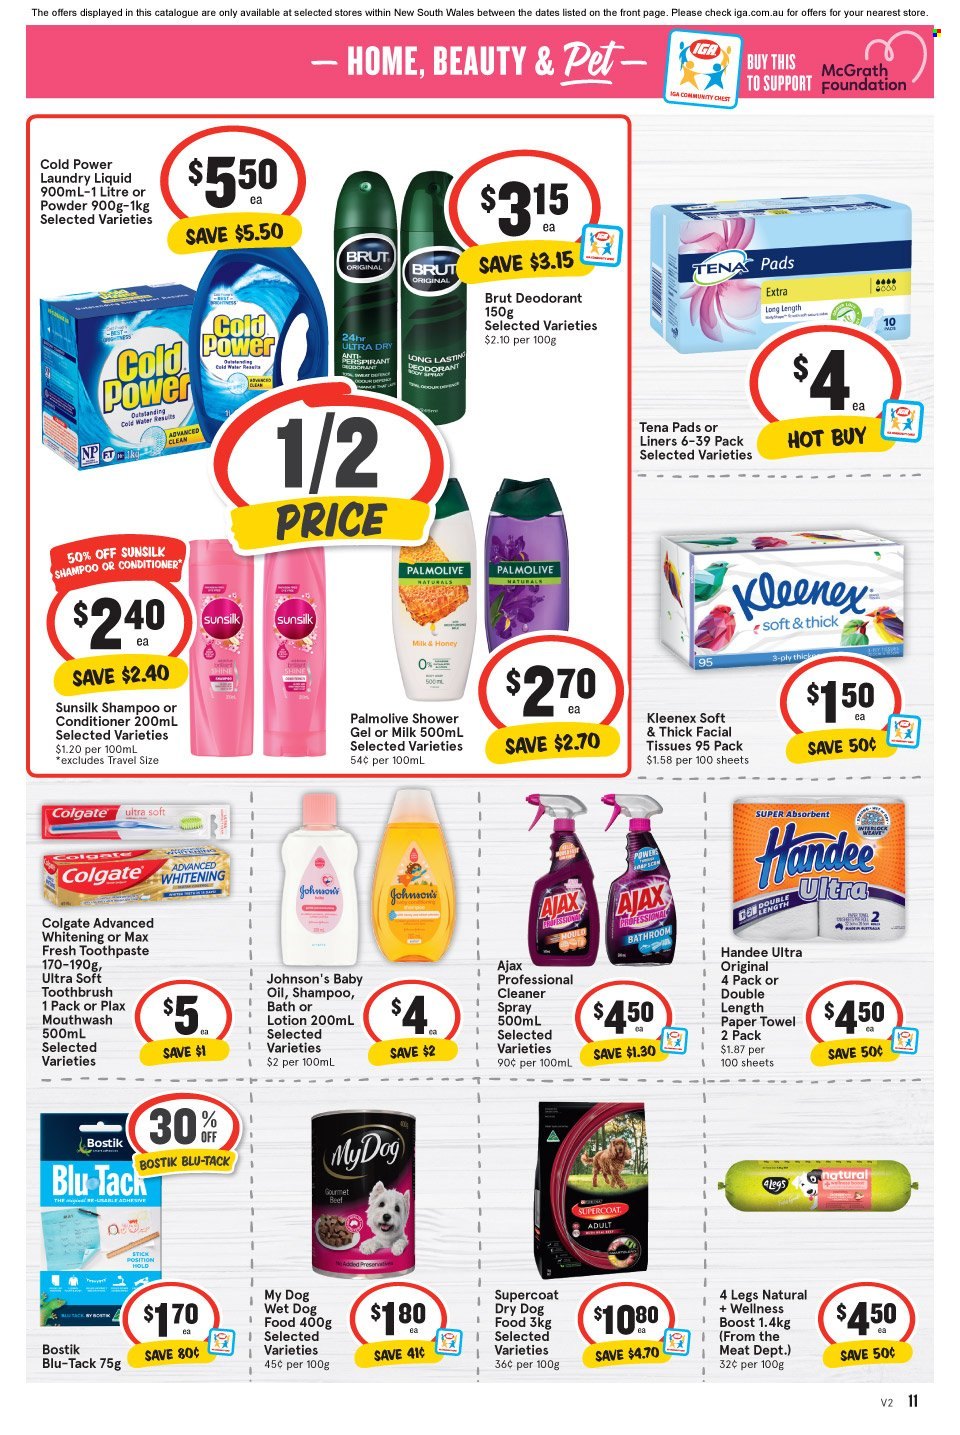 thumbnail - IGA Catalogue - 13 Oct 2021 - 19 Oct 2021 - Sales products - milk, honey, Boost, Johnson's, baby oil, Kleenex, tissues, Handee, paper towels, cleaner, Ajax, laundry detergent, shampoo, shower gel, Palmolive, Sunsilk, Colgate, toothbrush, toothpaste, mouthwash, Plax, sanitary pads, Tena Lady, facial tissues, conditioner, body lotion, anti-perspirant, deodorant, Brut, animal food, dog food, wet dog food, Supercoat, dry dog food. Page 11.